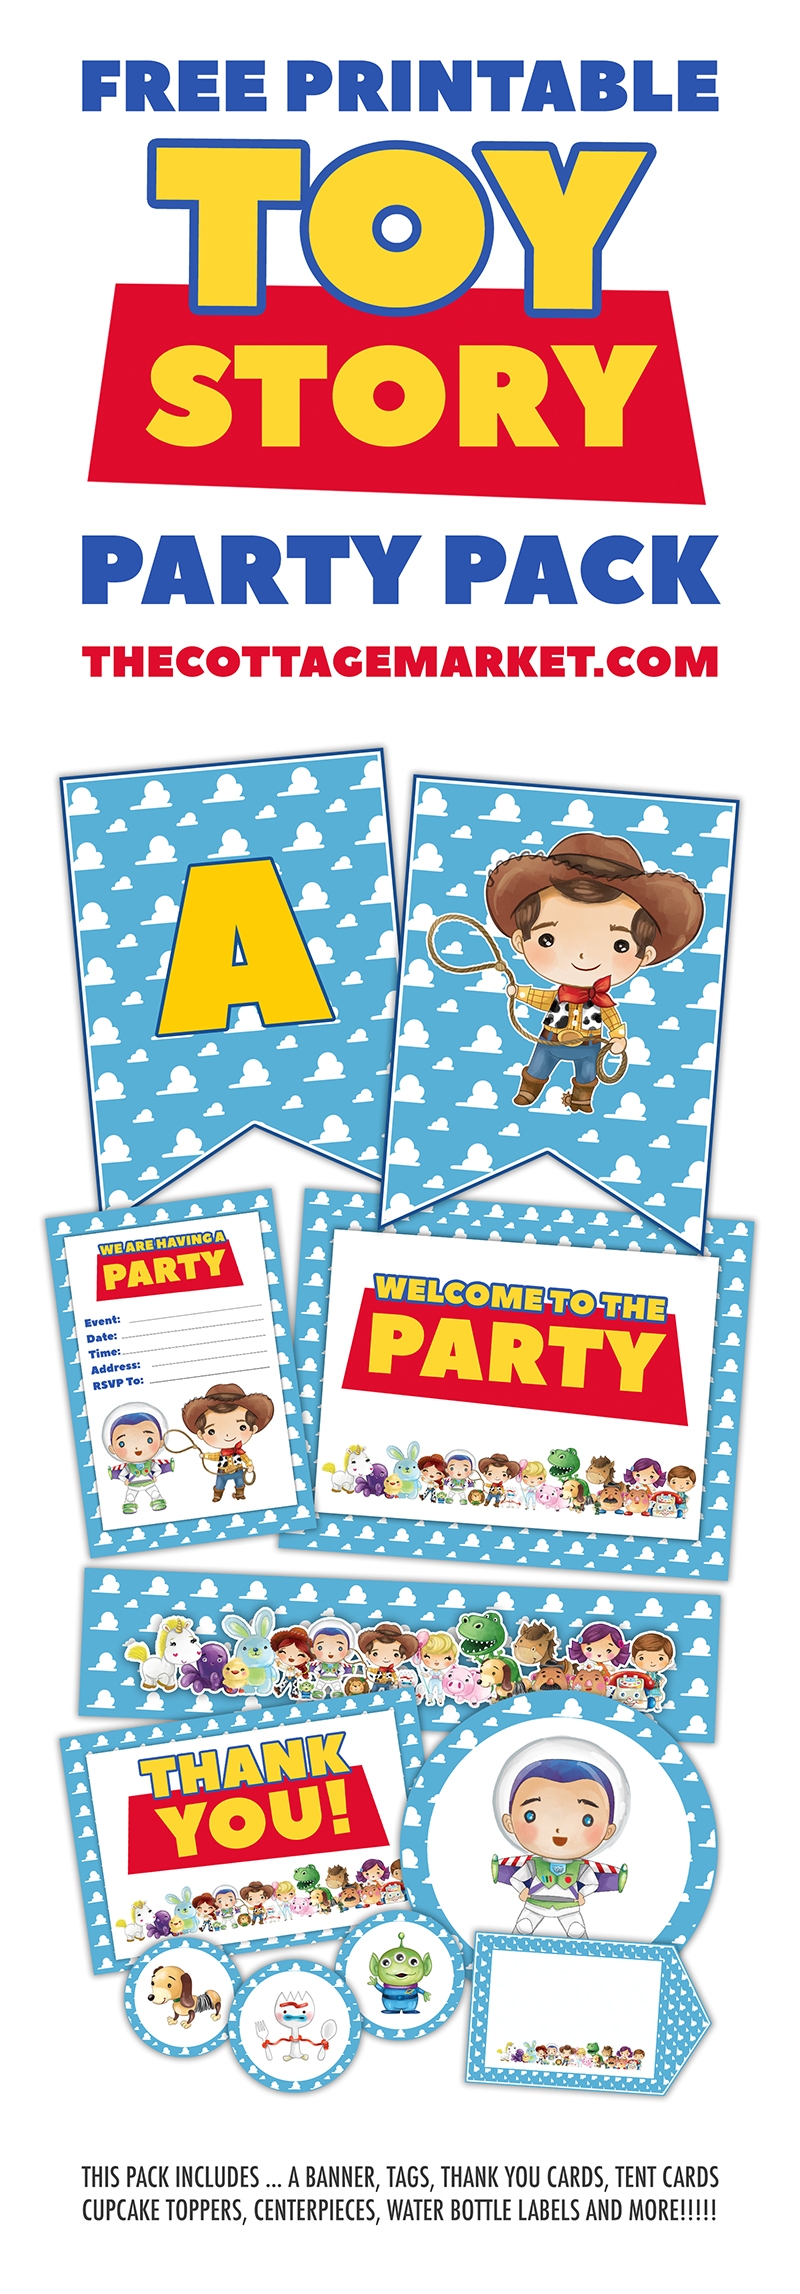 Free Printable Toy Story Party Pack The Cottage Market